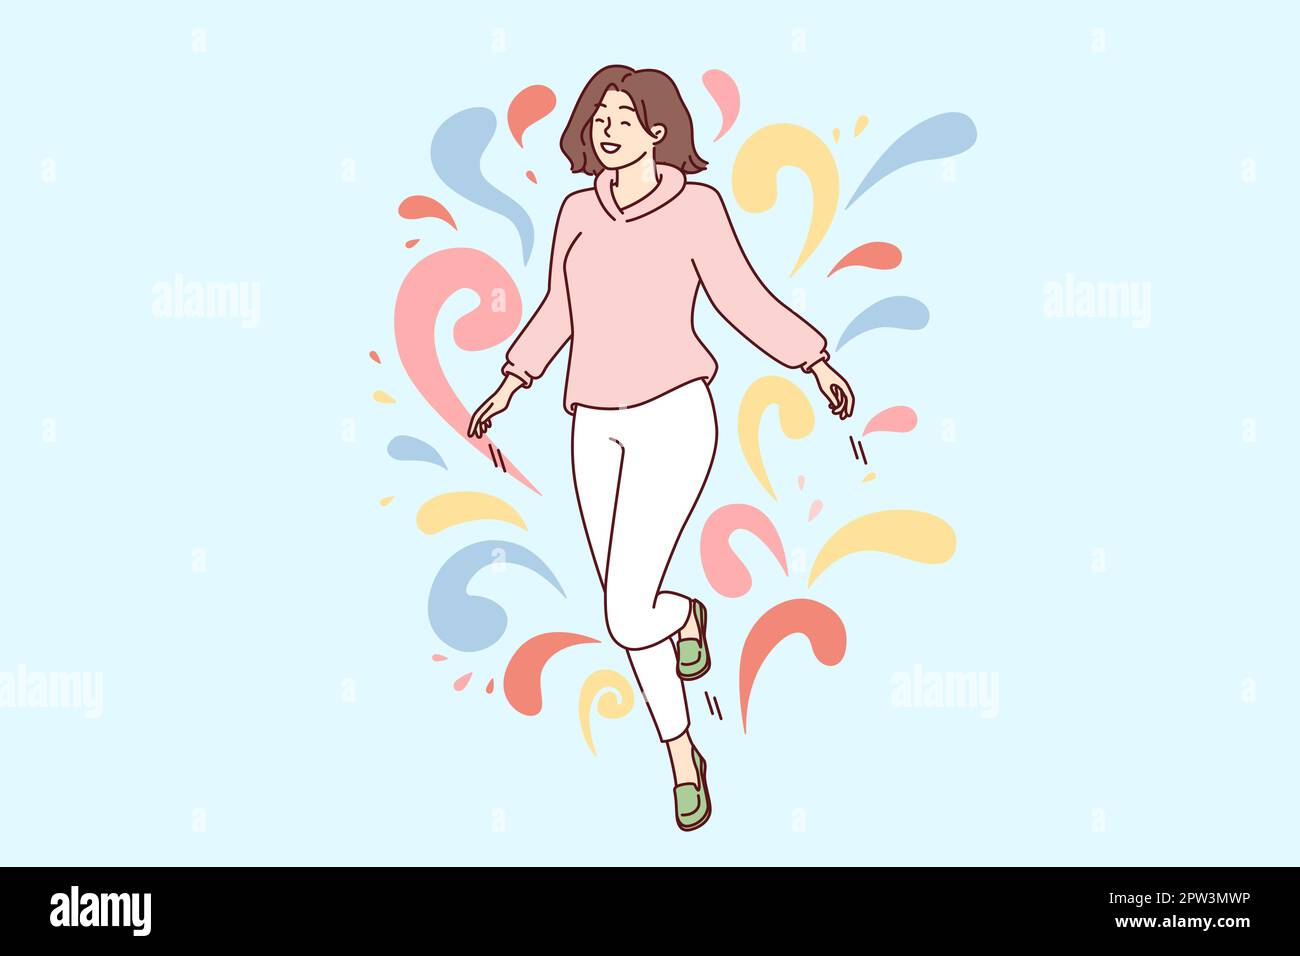 Woman walks in weightlessness and waves arms located among multi-colored drops. Vector image Stock Vector